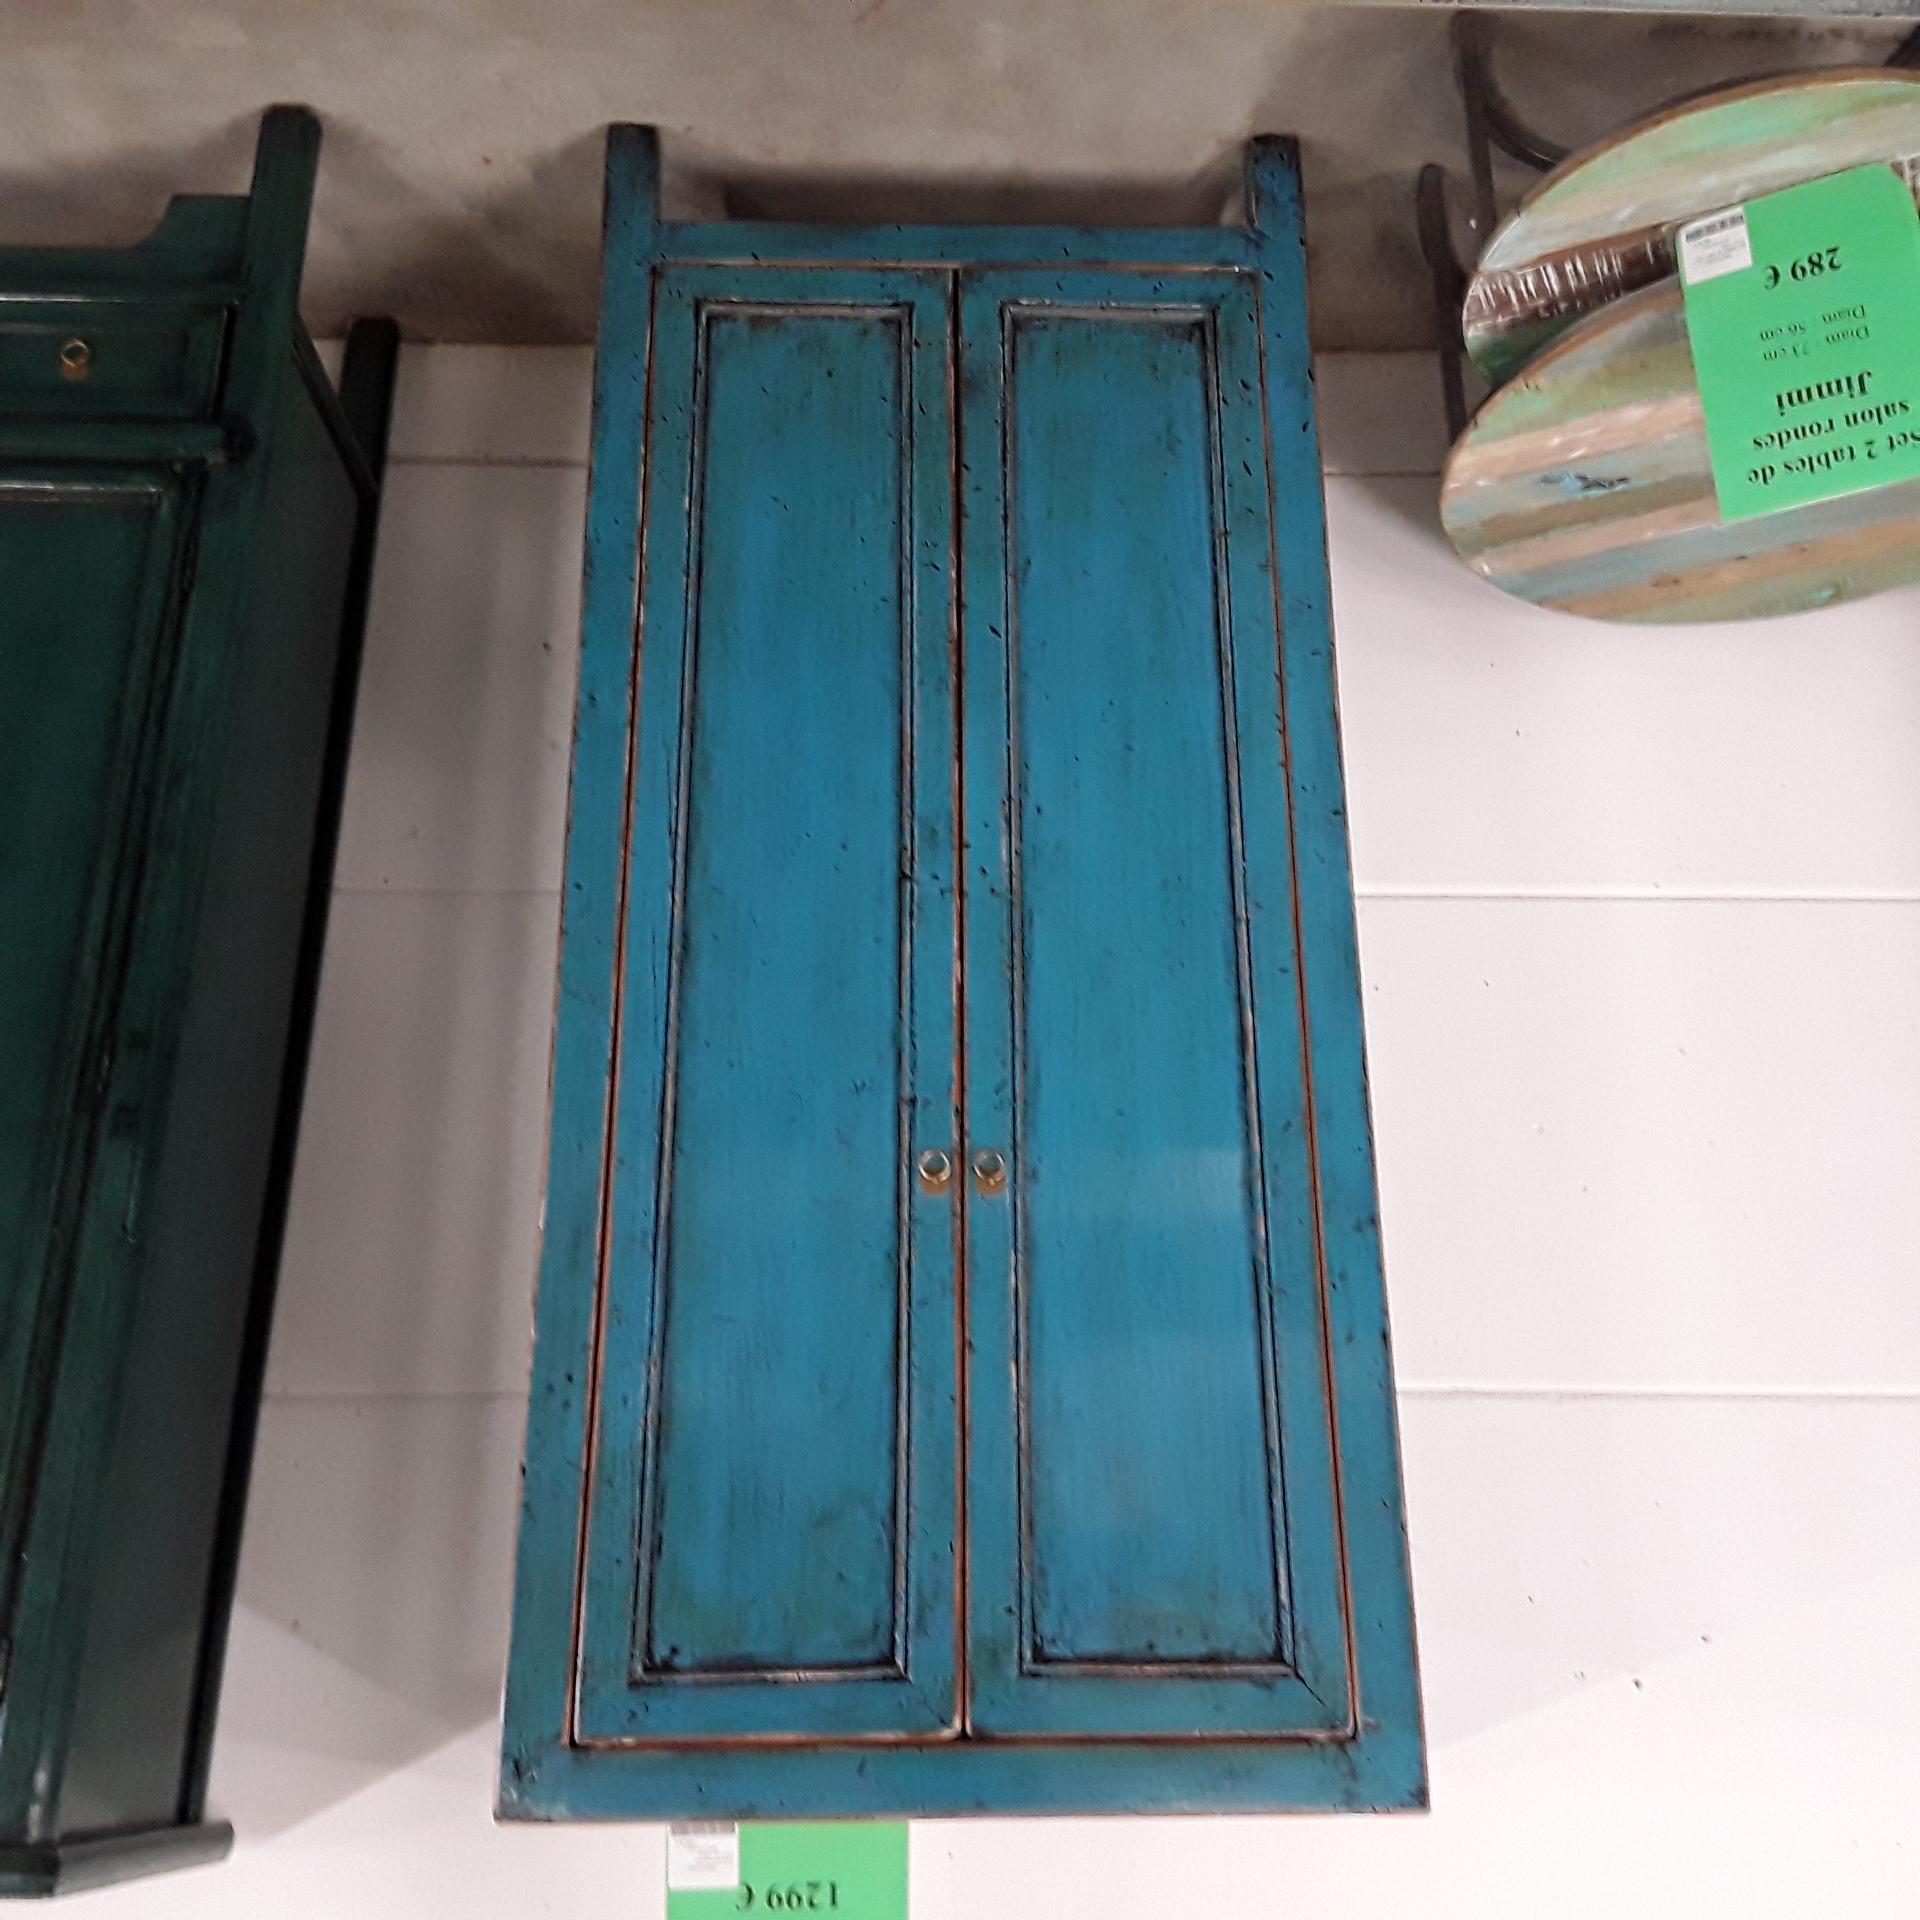 <p>Cabinet laqué bleu<br />turquoise 12634<br />1 299,00 € T.T.C<br /><a href="/Article/4363?type=neuf" style="color:white;" target="_blank">Lien vers l&#39;article</a></p>